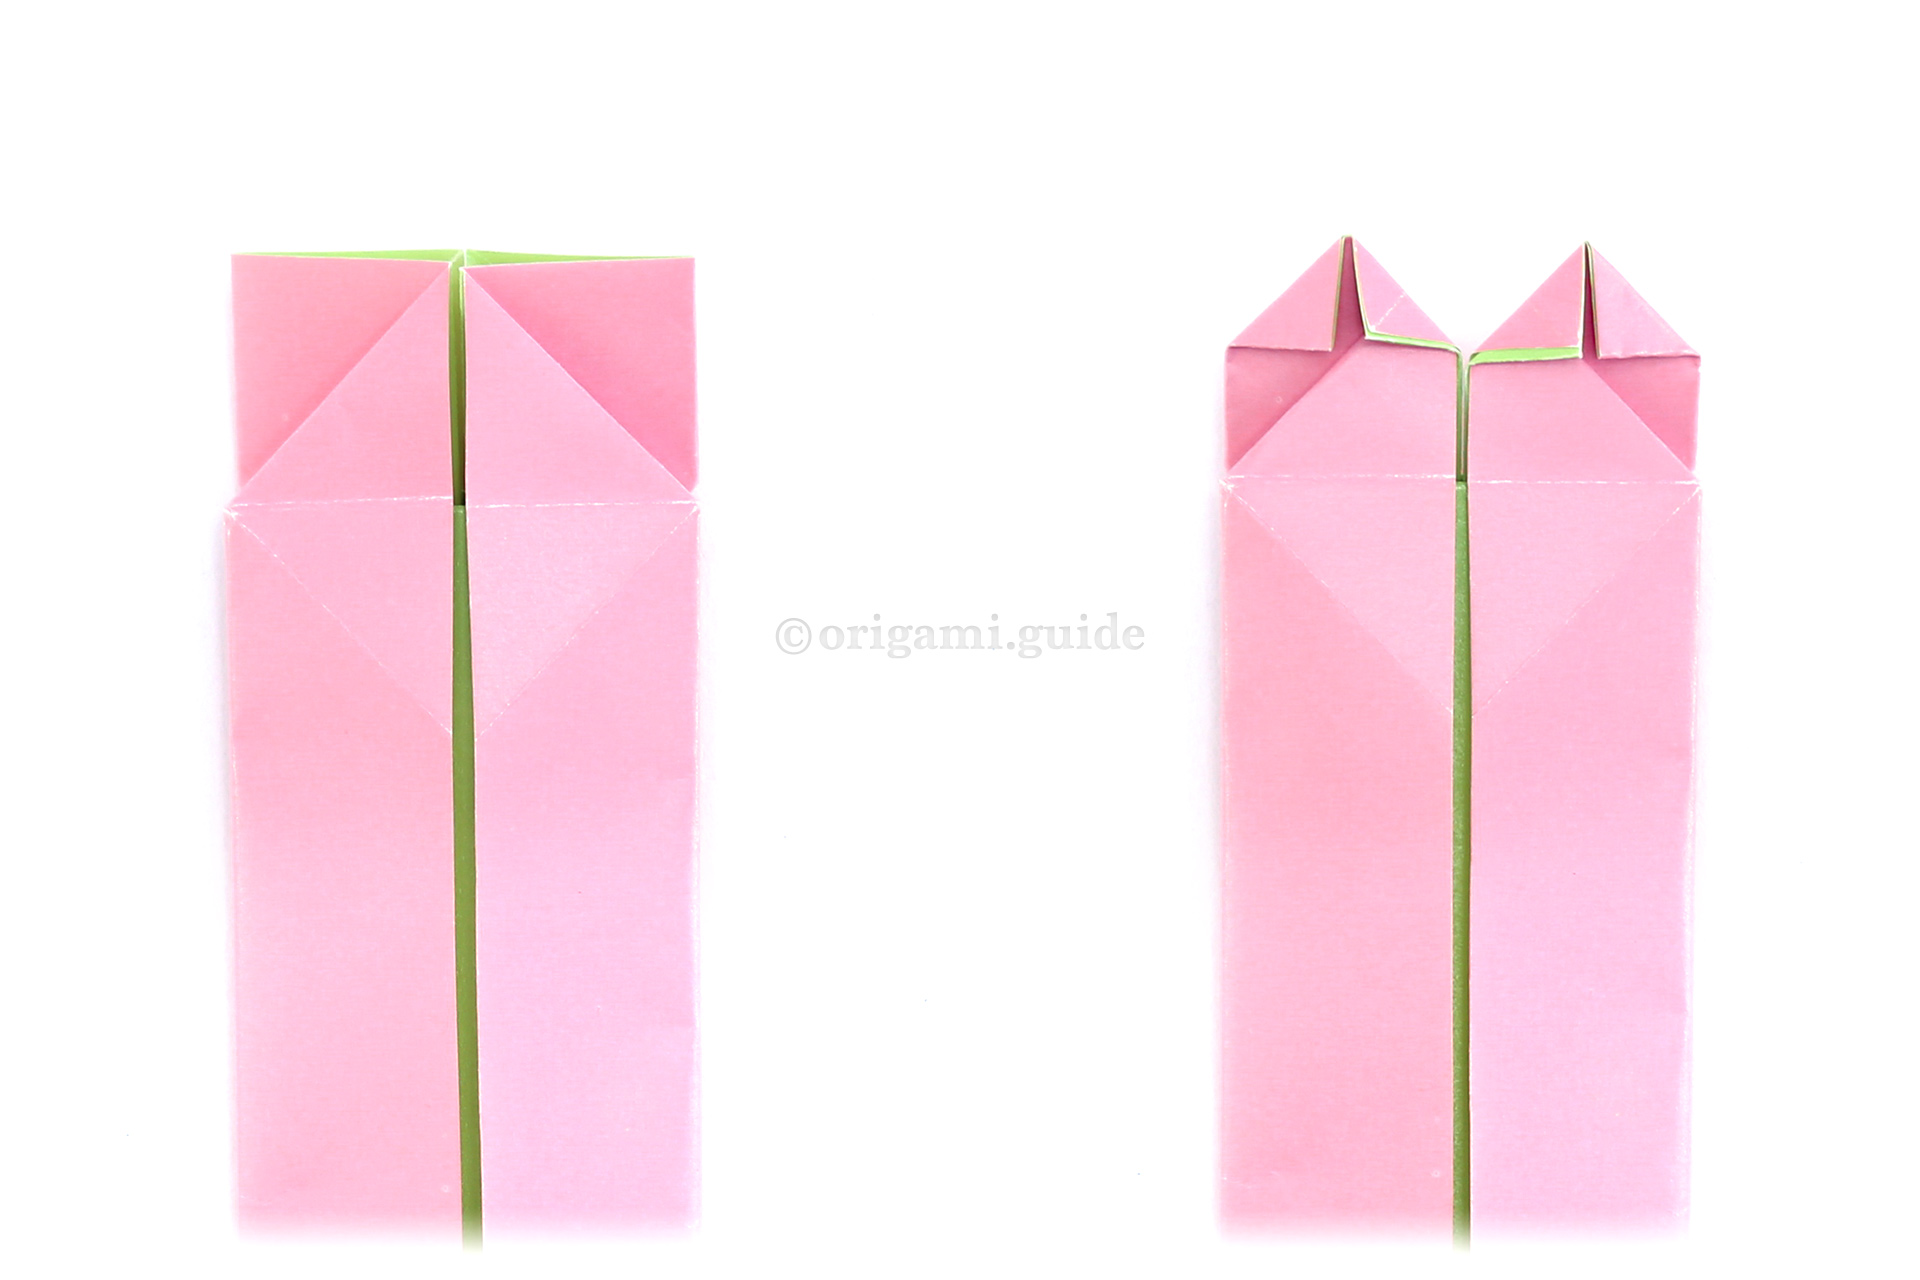 Flip the model back over to the other side. Next, shape the top of the heart by folding the top points diagonally down.